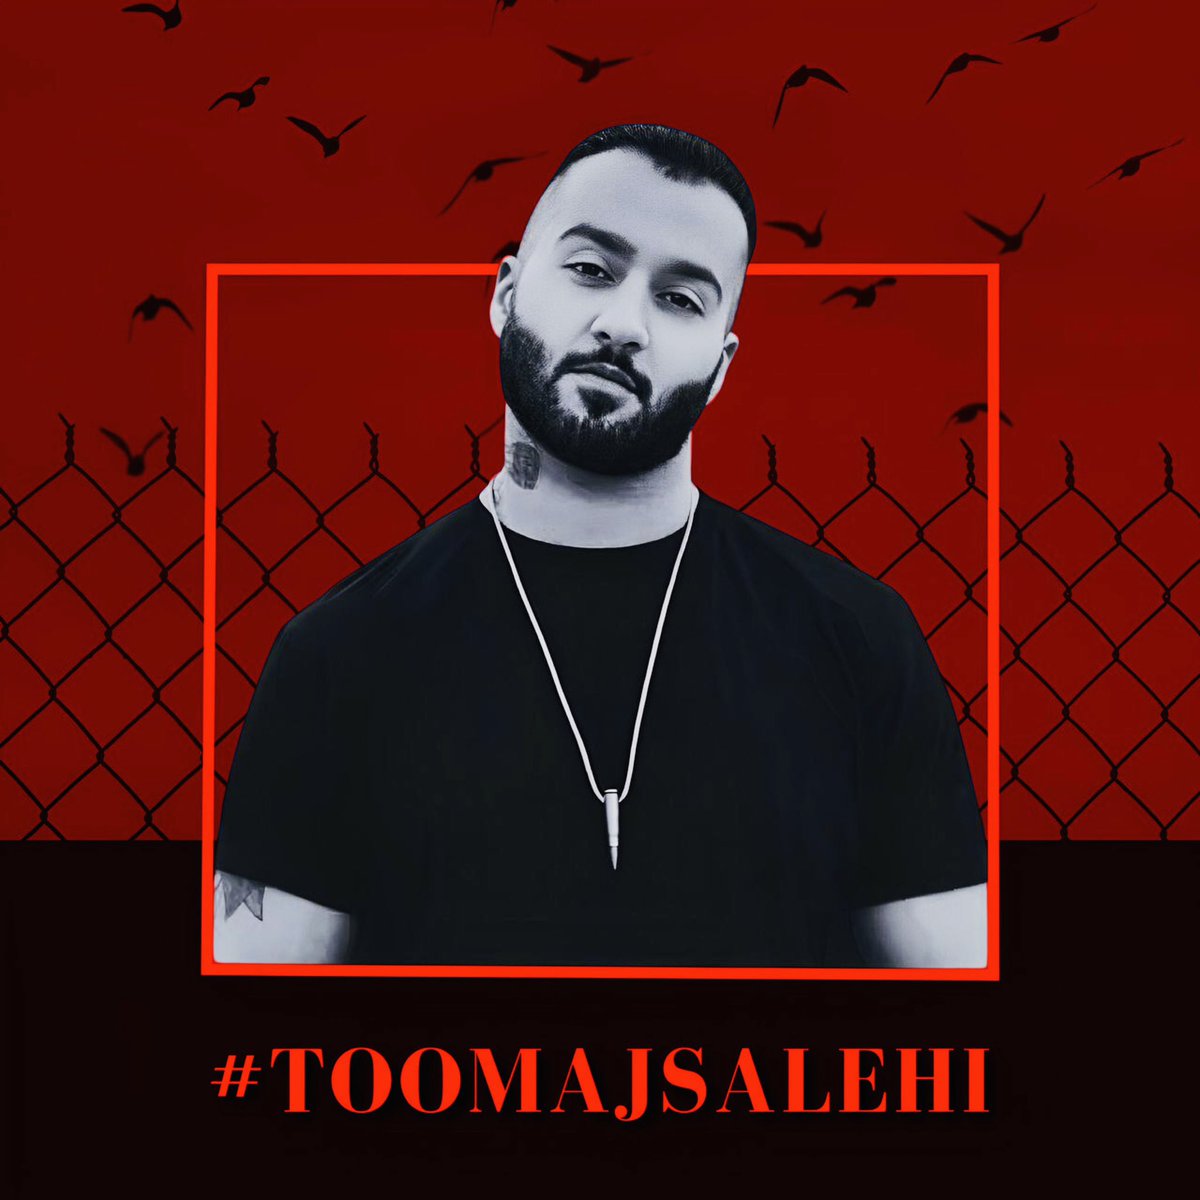 The Islamic regime wants to stop the voice of #ToomajSalehi being heard at any cost. His is a unique brave and unparalleled voice of a generation. They've not only sentenced him to death, but also taken away his telephone privileges and are stopping others in jail #FreeToomaj